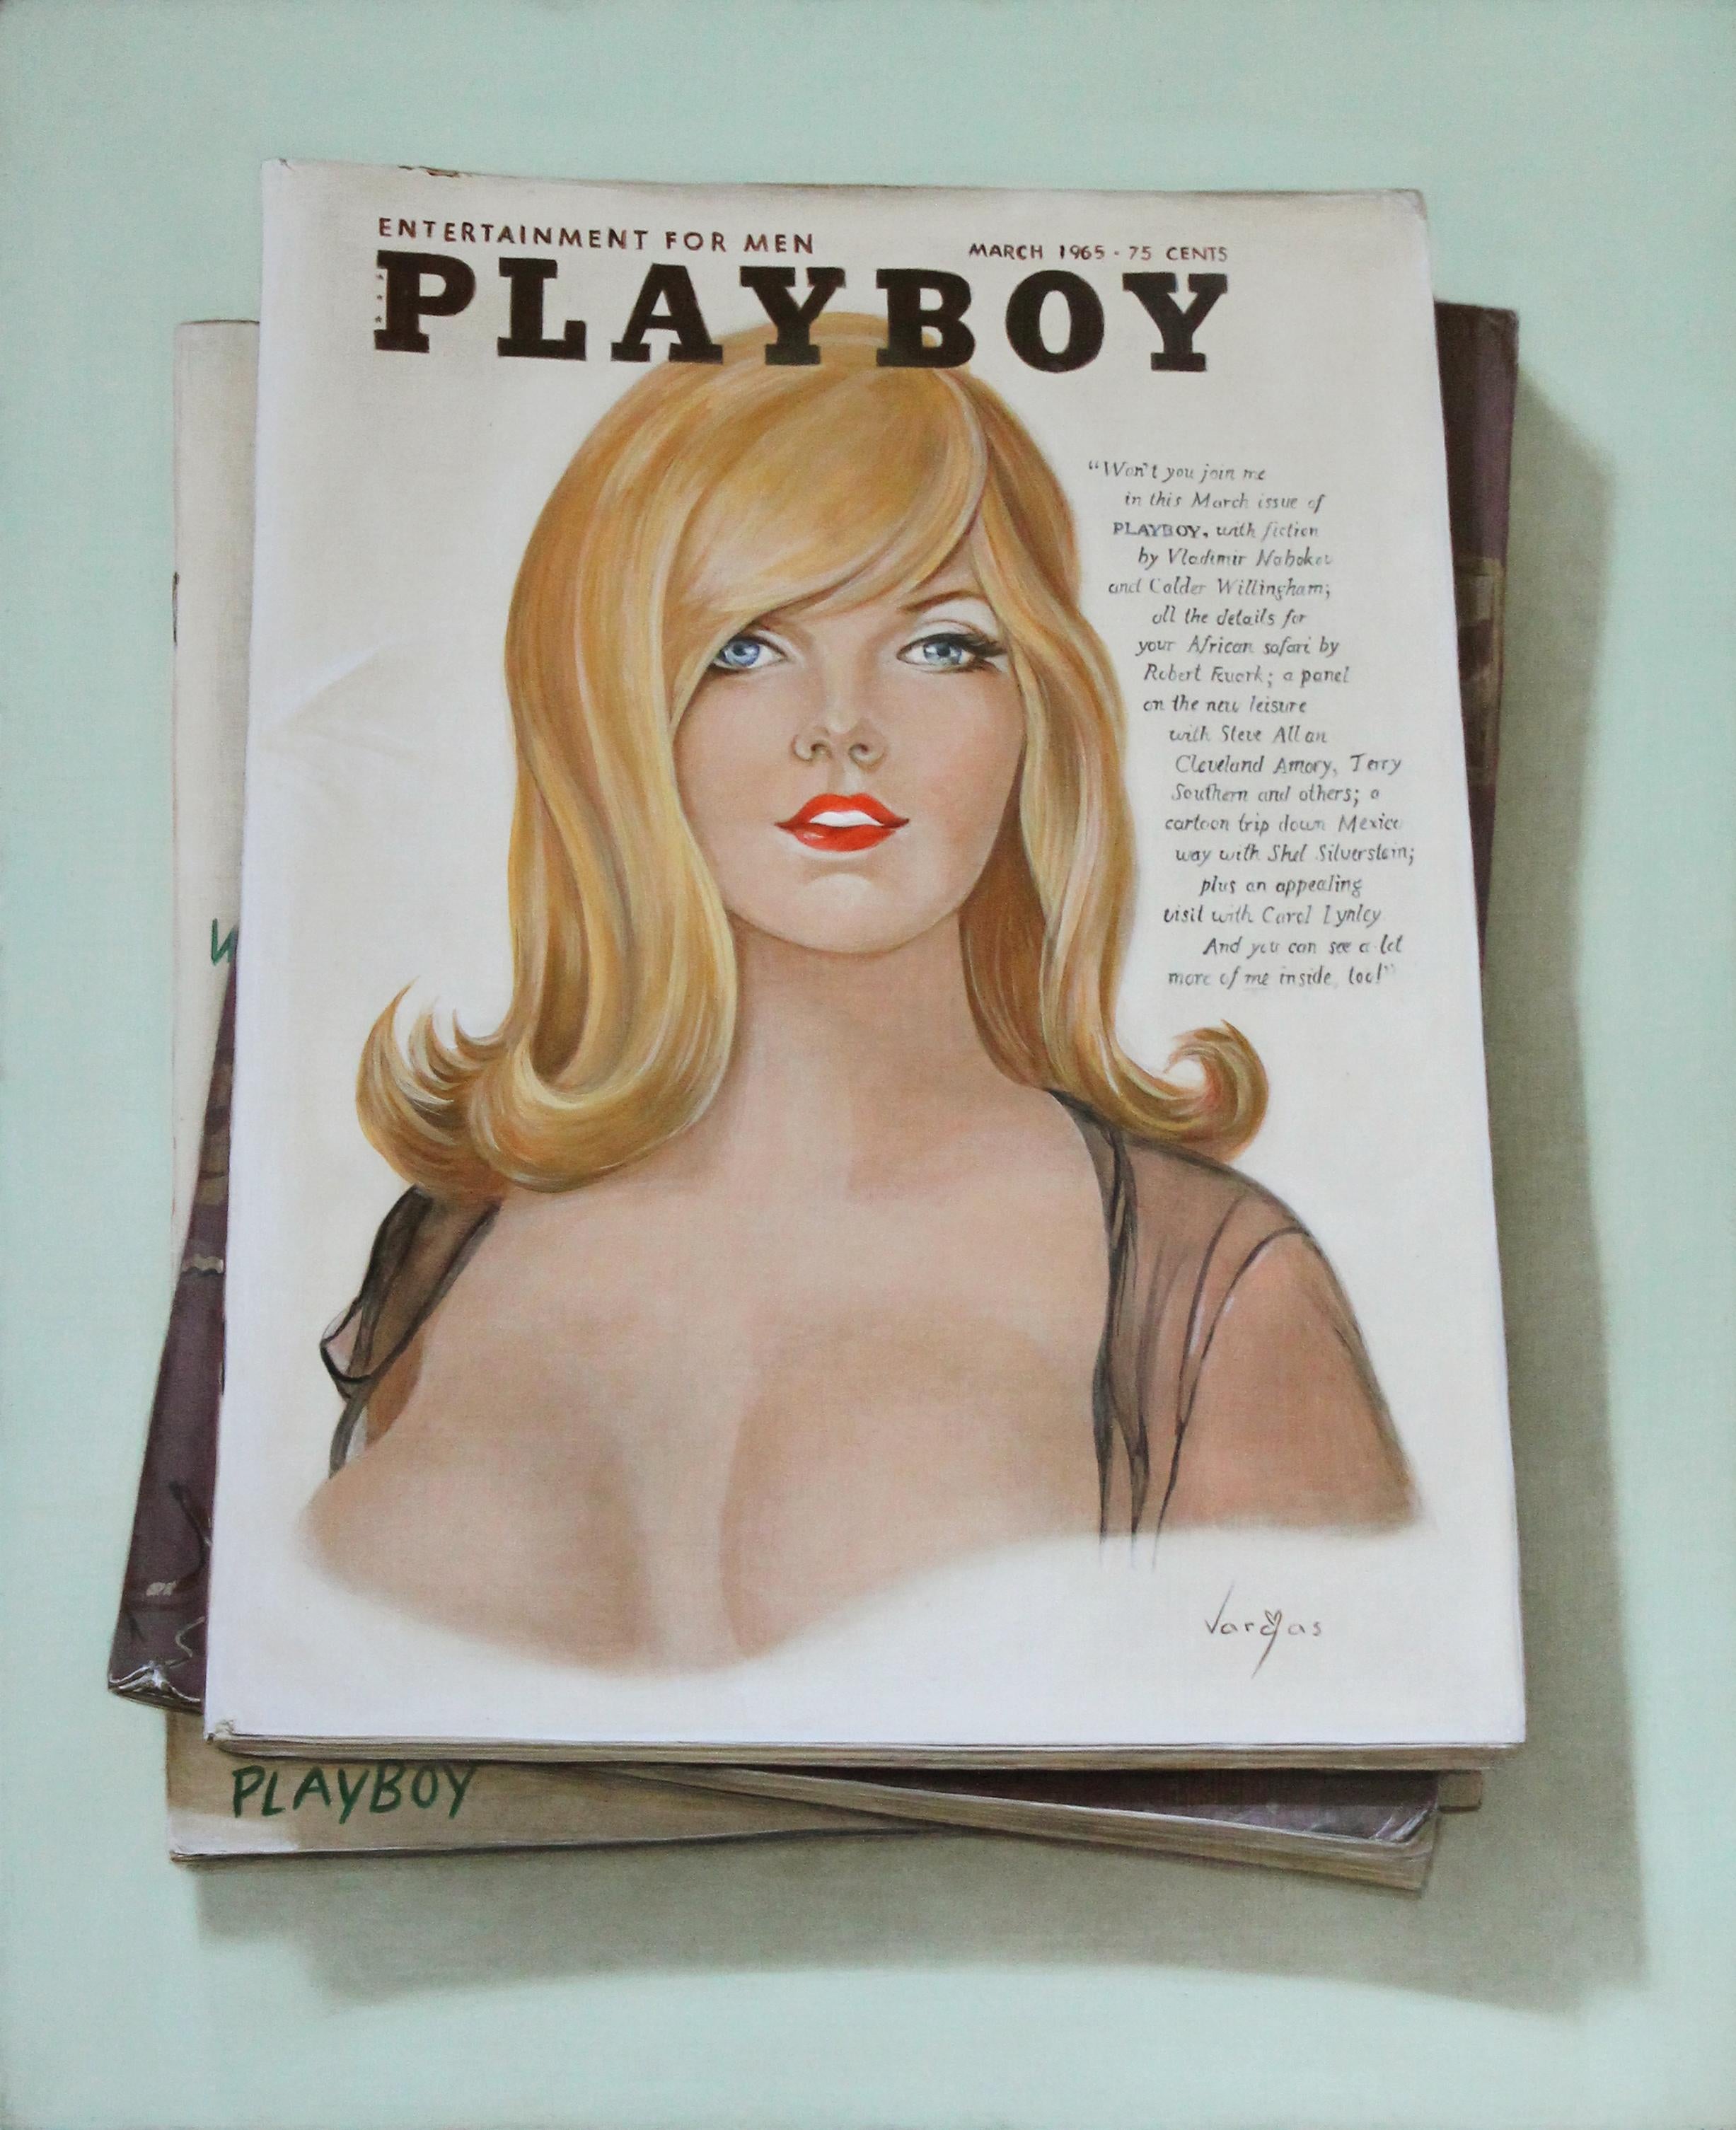 Playboy - Painting by Holly Farrell